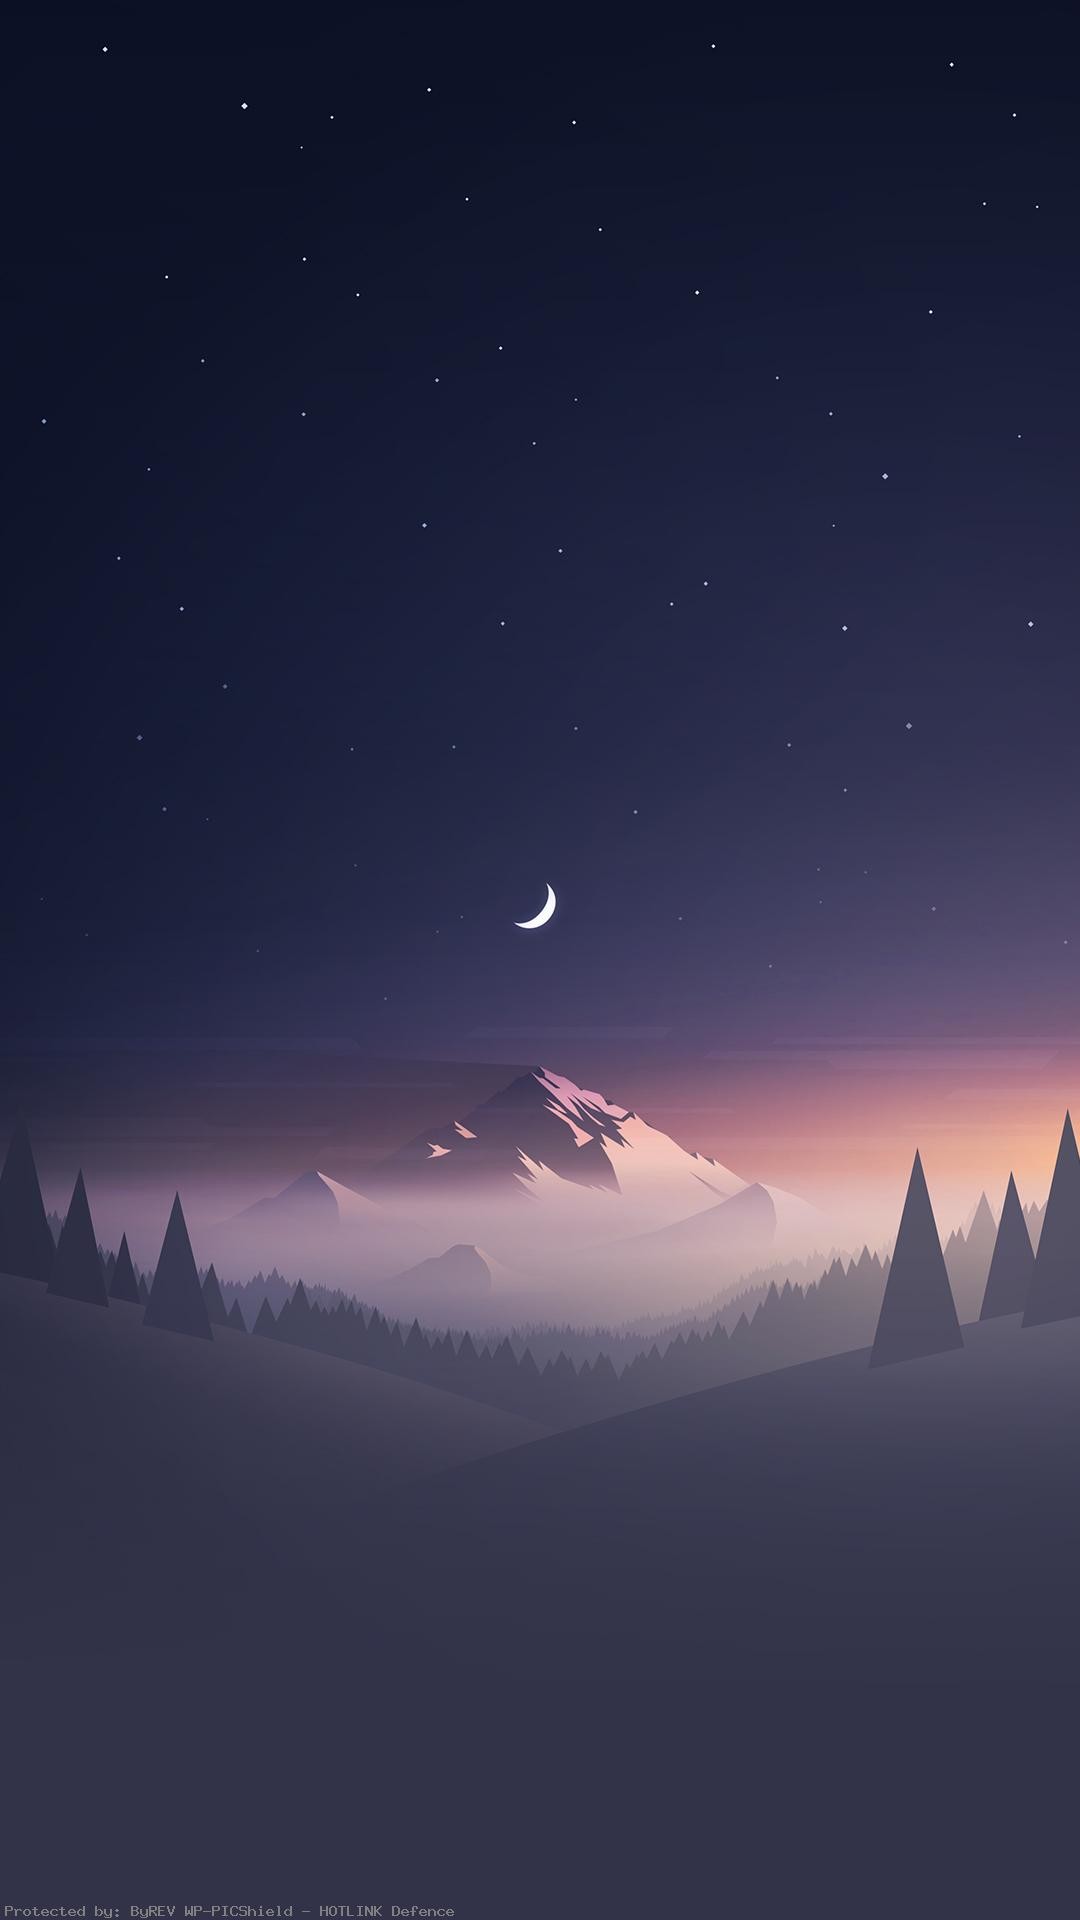 1080x1920 Stars-And-Moon-Winter-Mountain-Landscape-iPhone-HD-